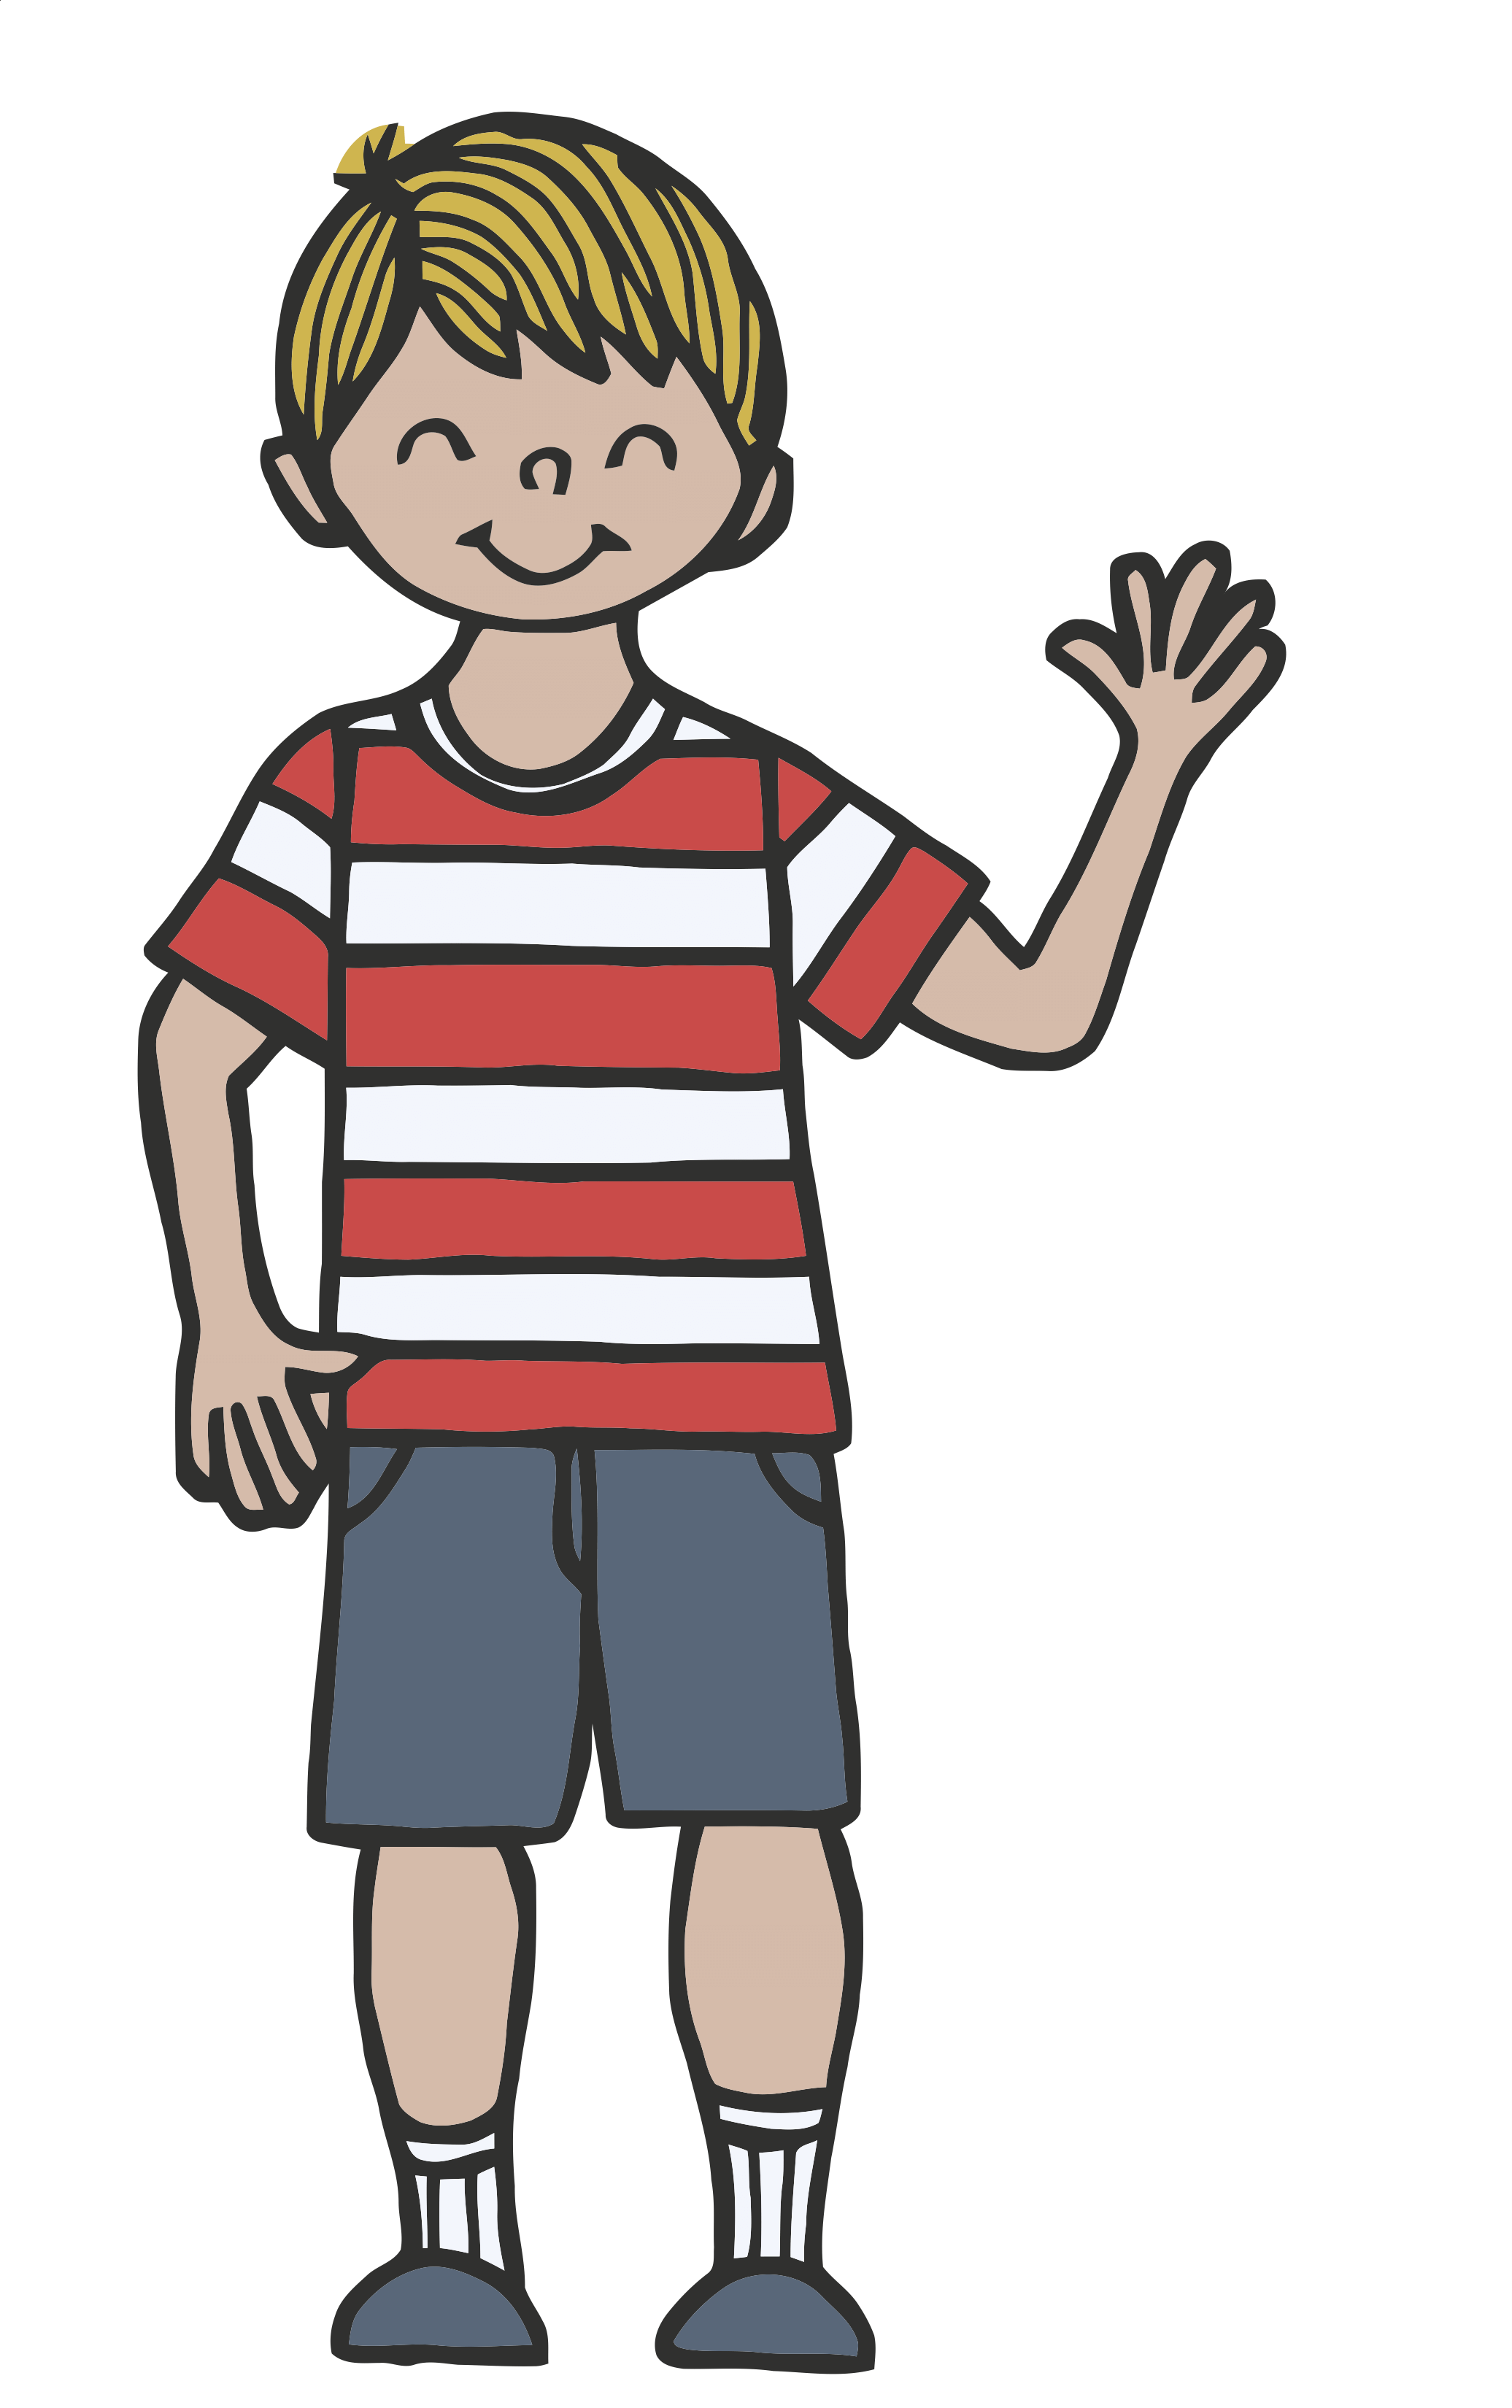 waving bye clipart - Clip Art Library